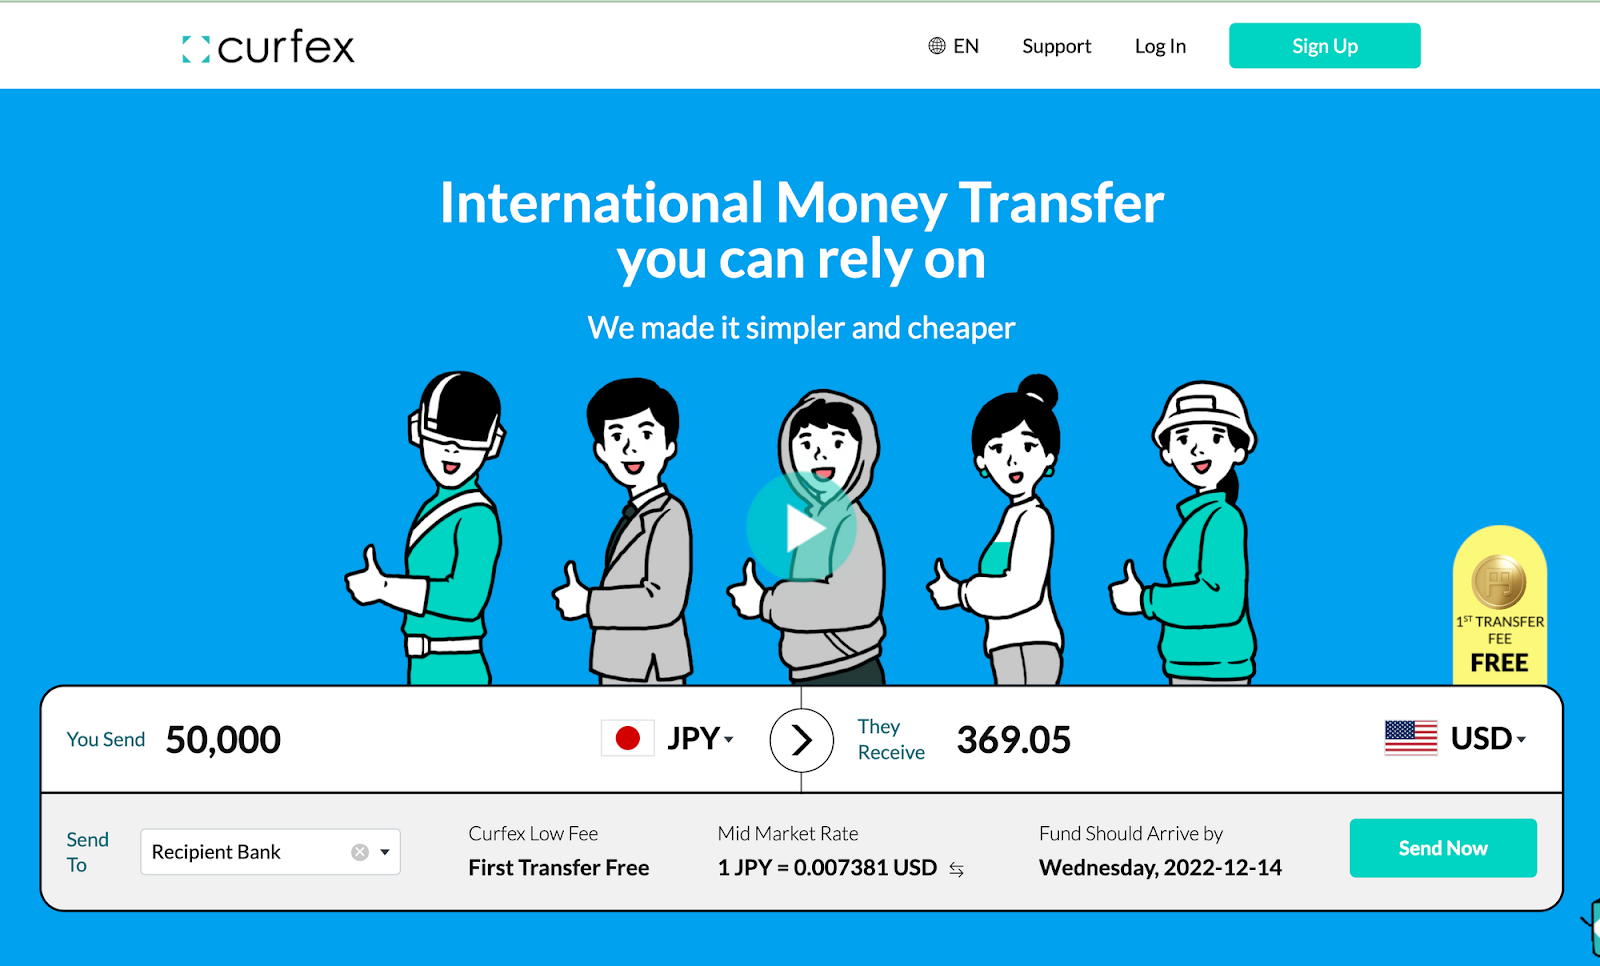 Which International Money Transfer Service is More Convenient, Wise (Formerly TransferWise) or Curfex? Thorough Comparison of International Money Transfer Services